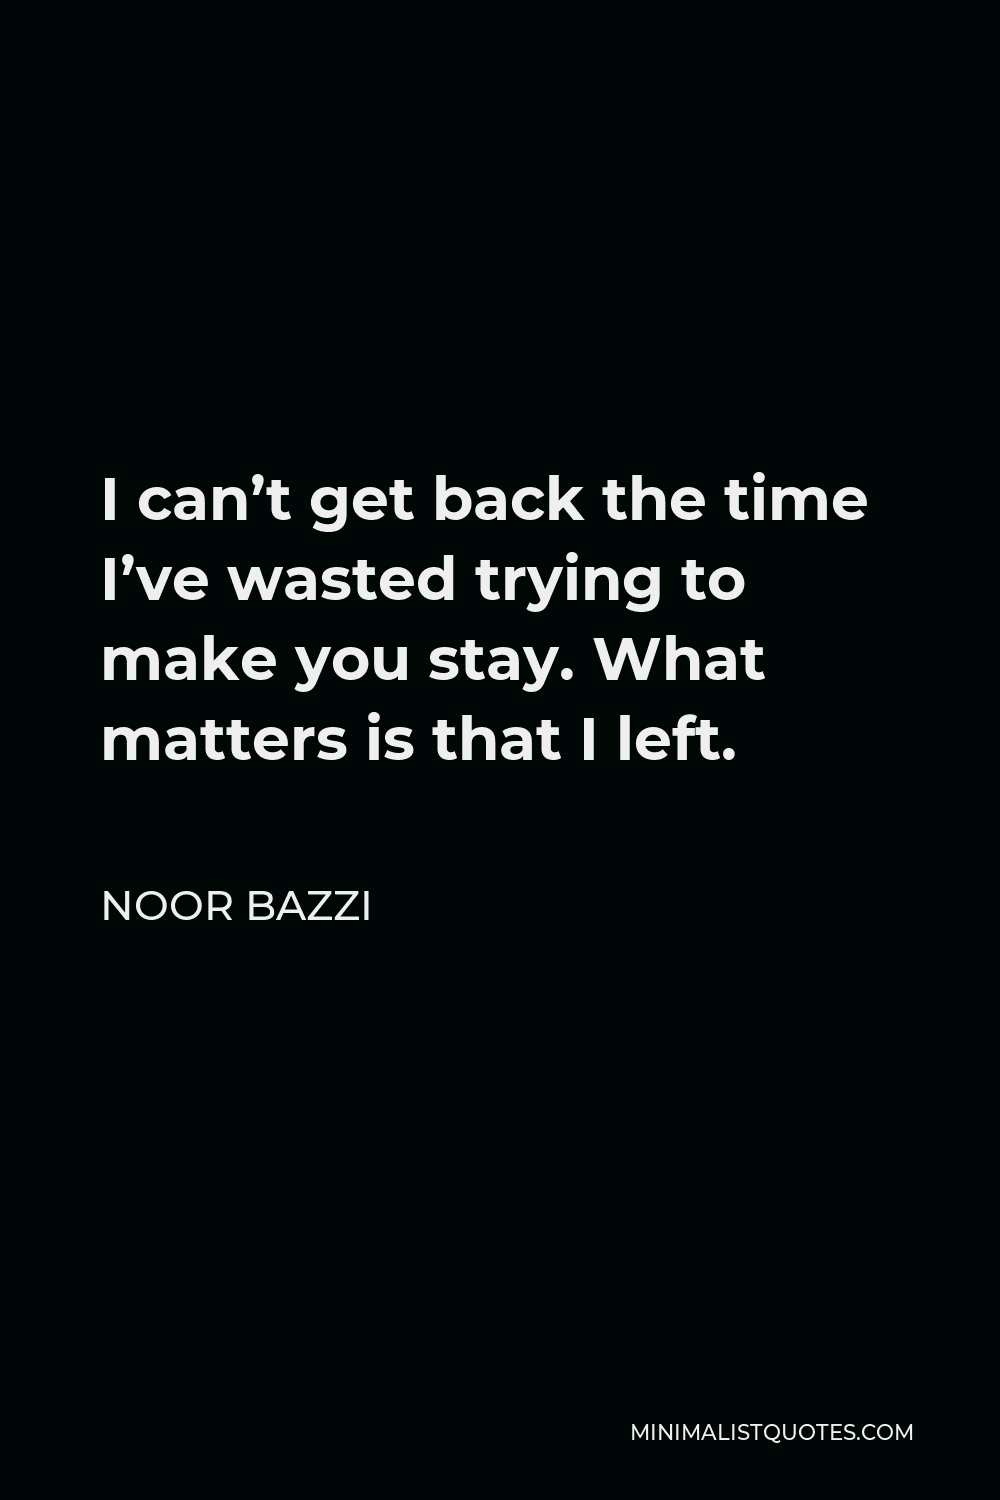 Noor Bazzi Quote - I can’t get back the time I’ve wasted trying to make you stay. What matters is that I left.